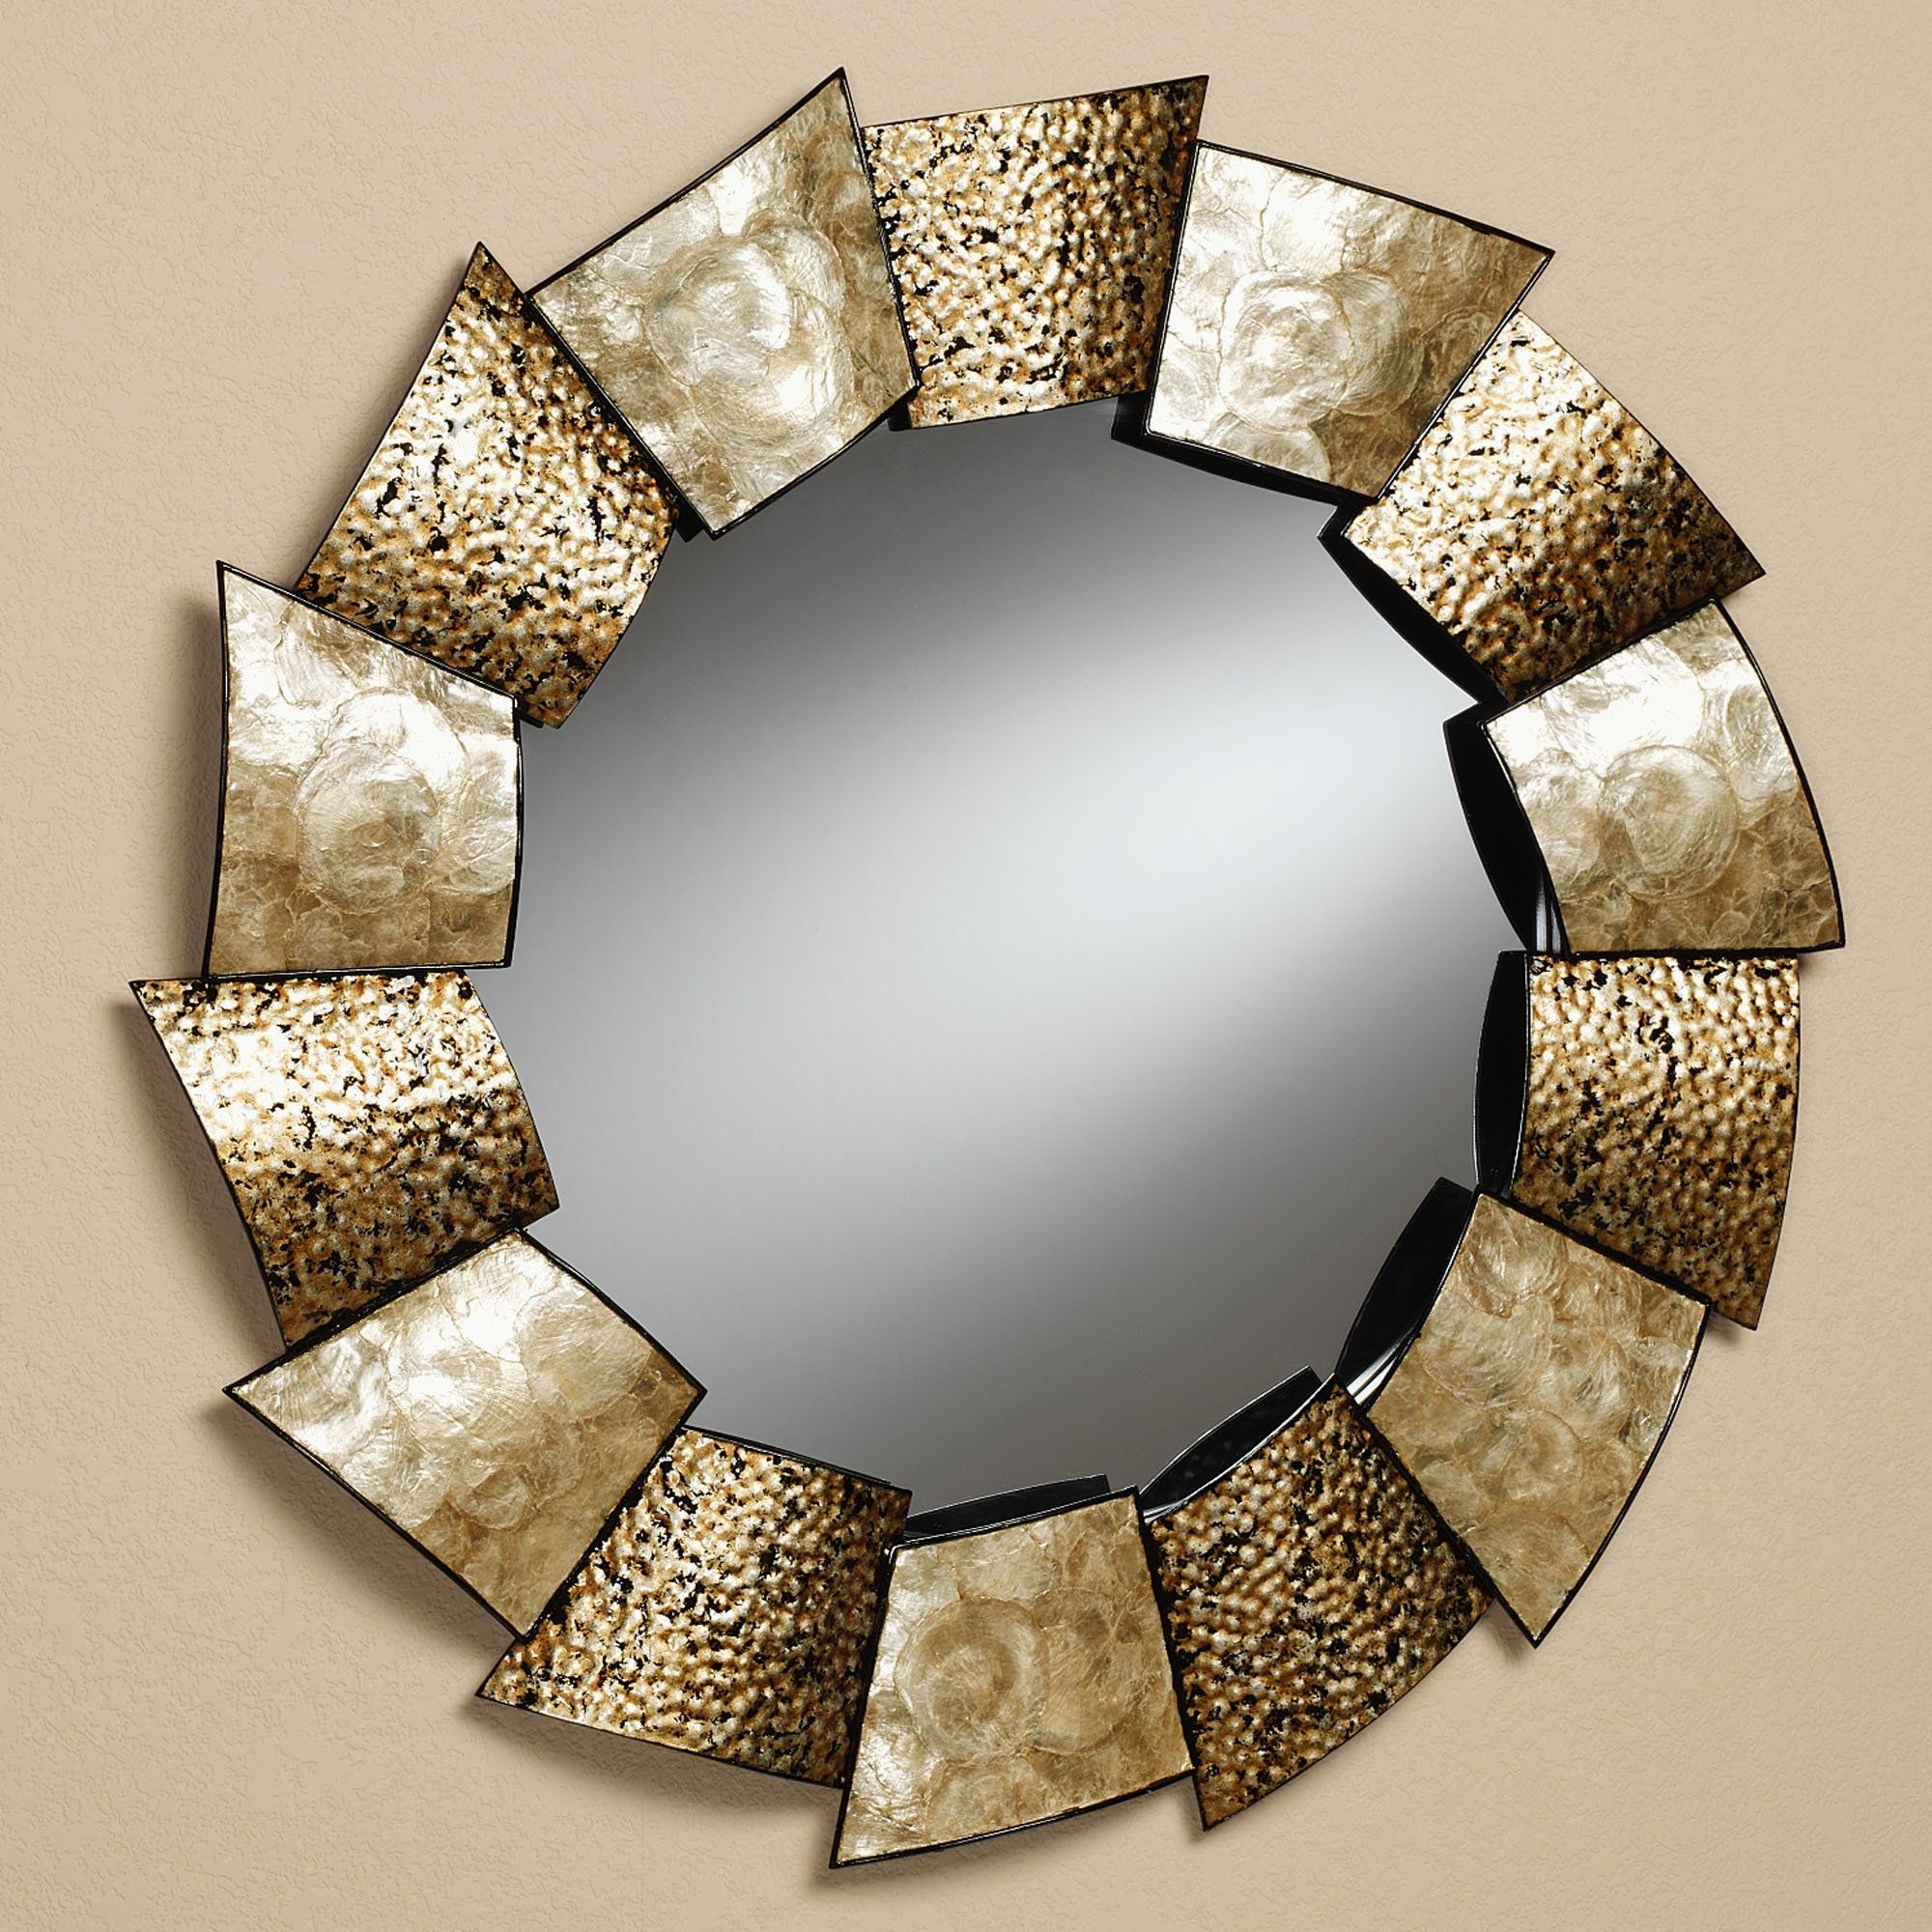 Decorative Bathroom Mirrors Decorative Bathroom Mirrors Sale Pertaining To Designer Mirrors For Walls (View 7 of 15)